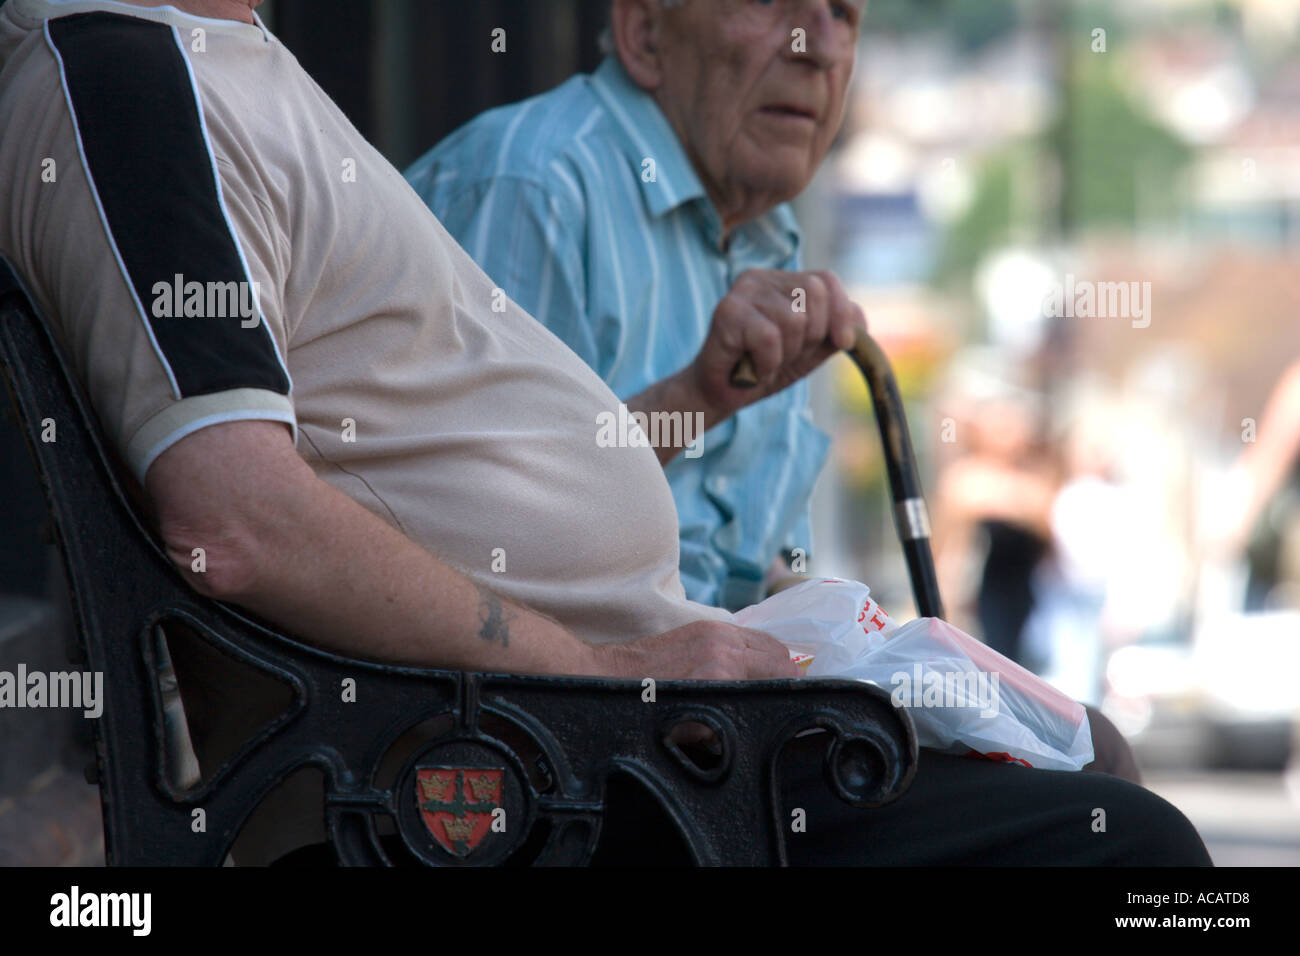 Two older men on a bench one with a large belly Stock Photo